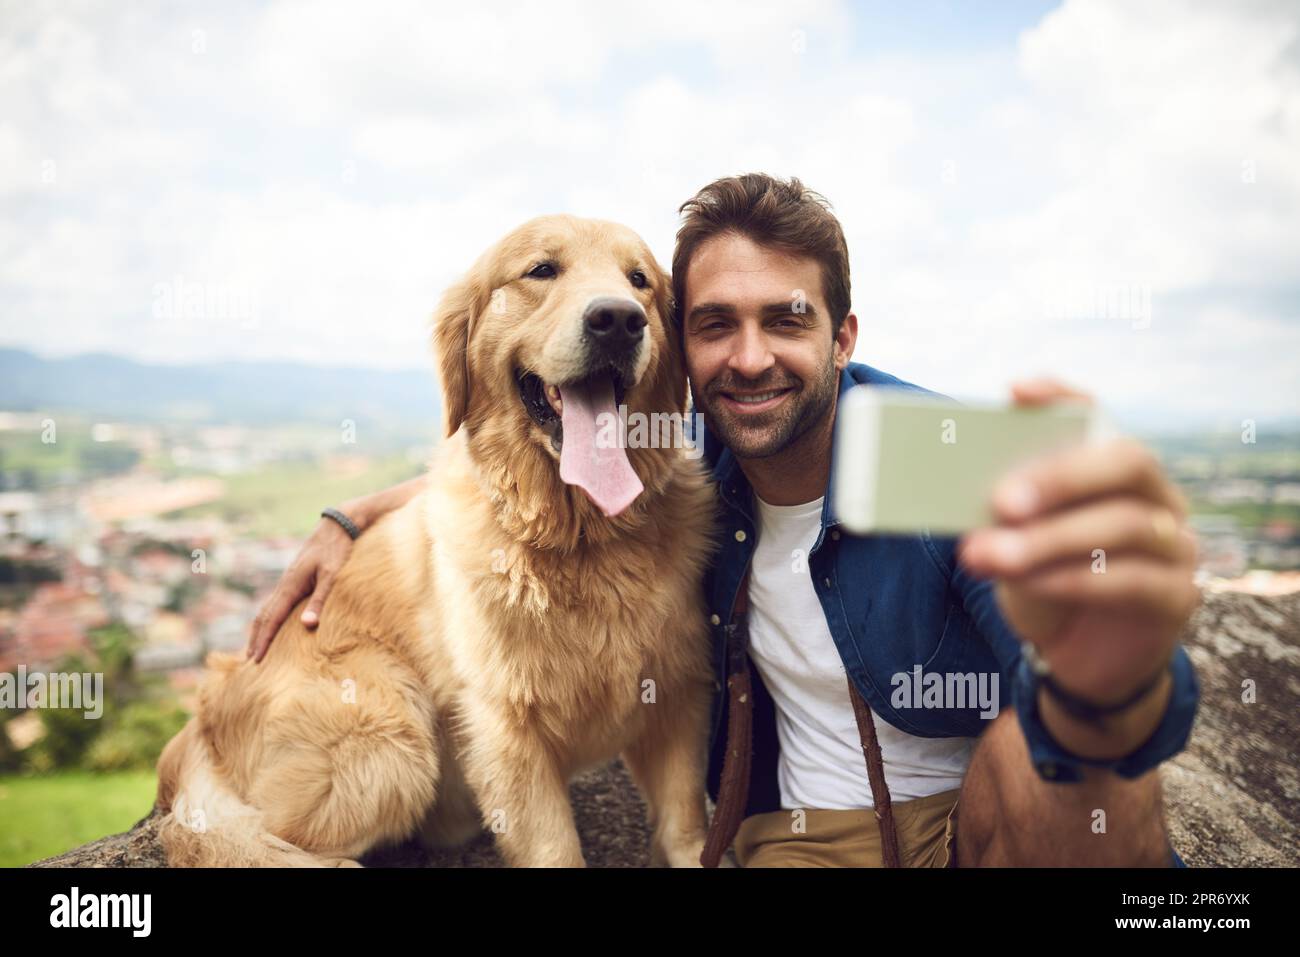 Just one more from the top. Full length shot of a handsome young man and his dog taking selfies while resting during a hike in the mountains. Stock Photo